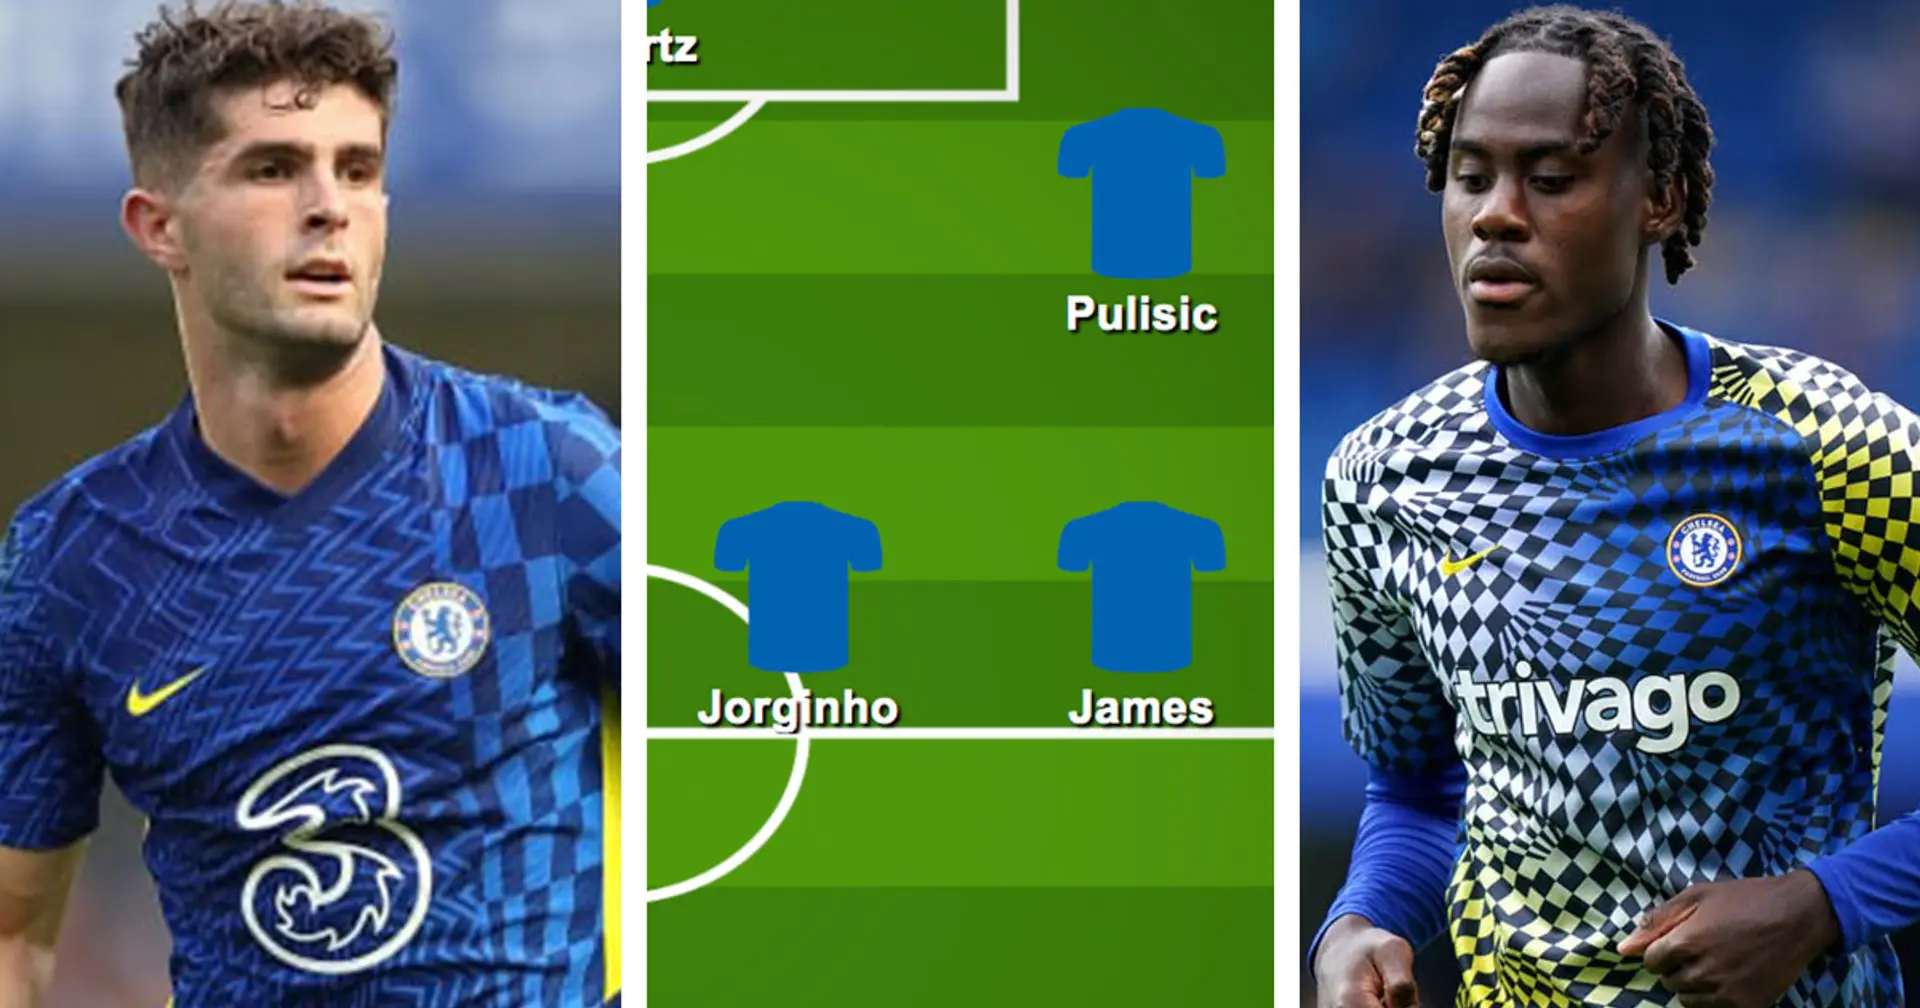 Ziyech or Pulisic in? Select Chelsea's ultimate XI for Burnley clash from 3 options